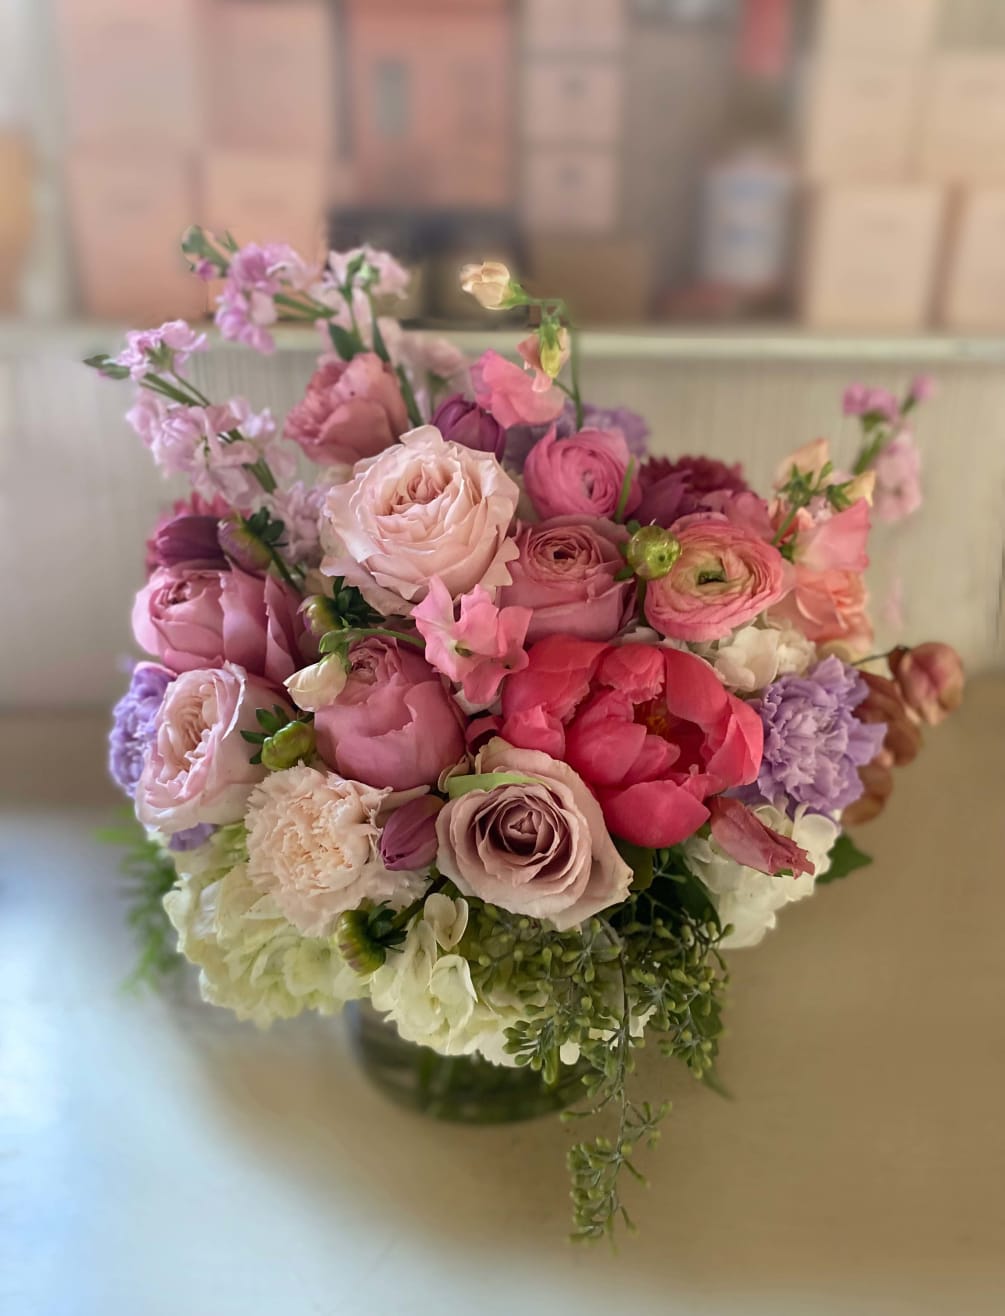 Beautiful and timeless, classic and whimsical arrangement in gorgeous violet and pink